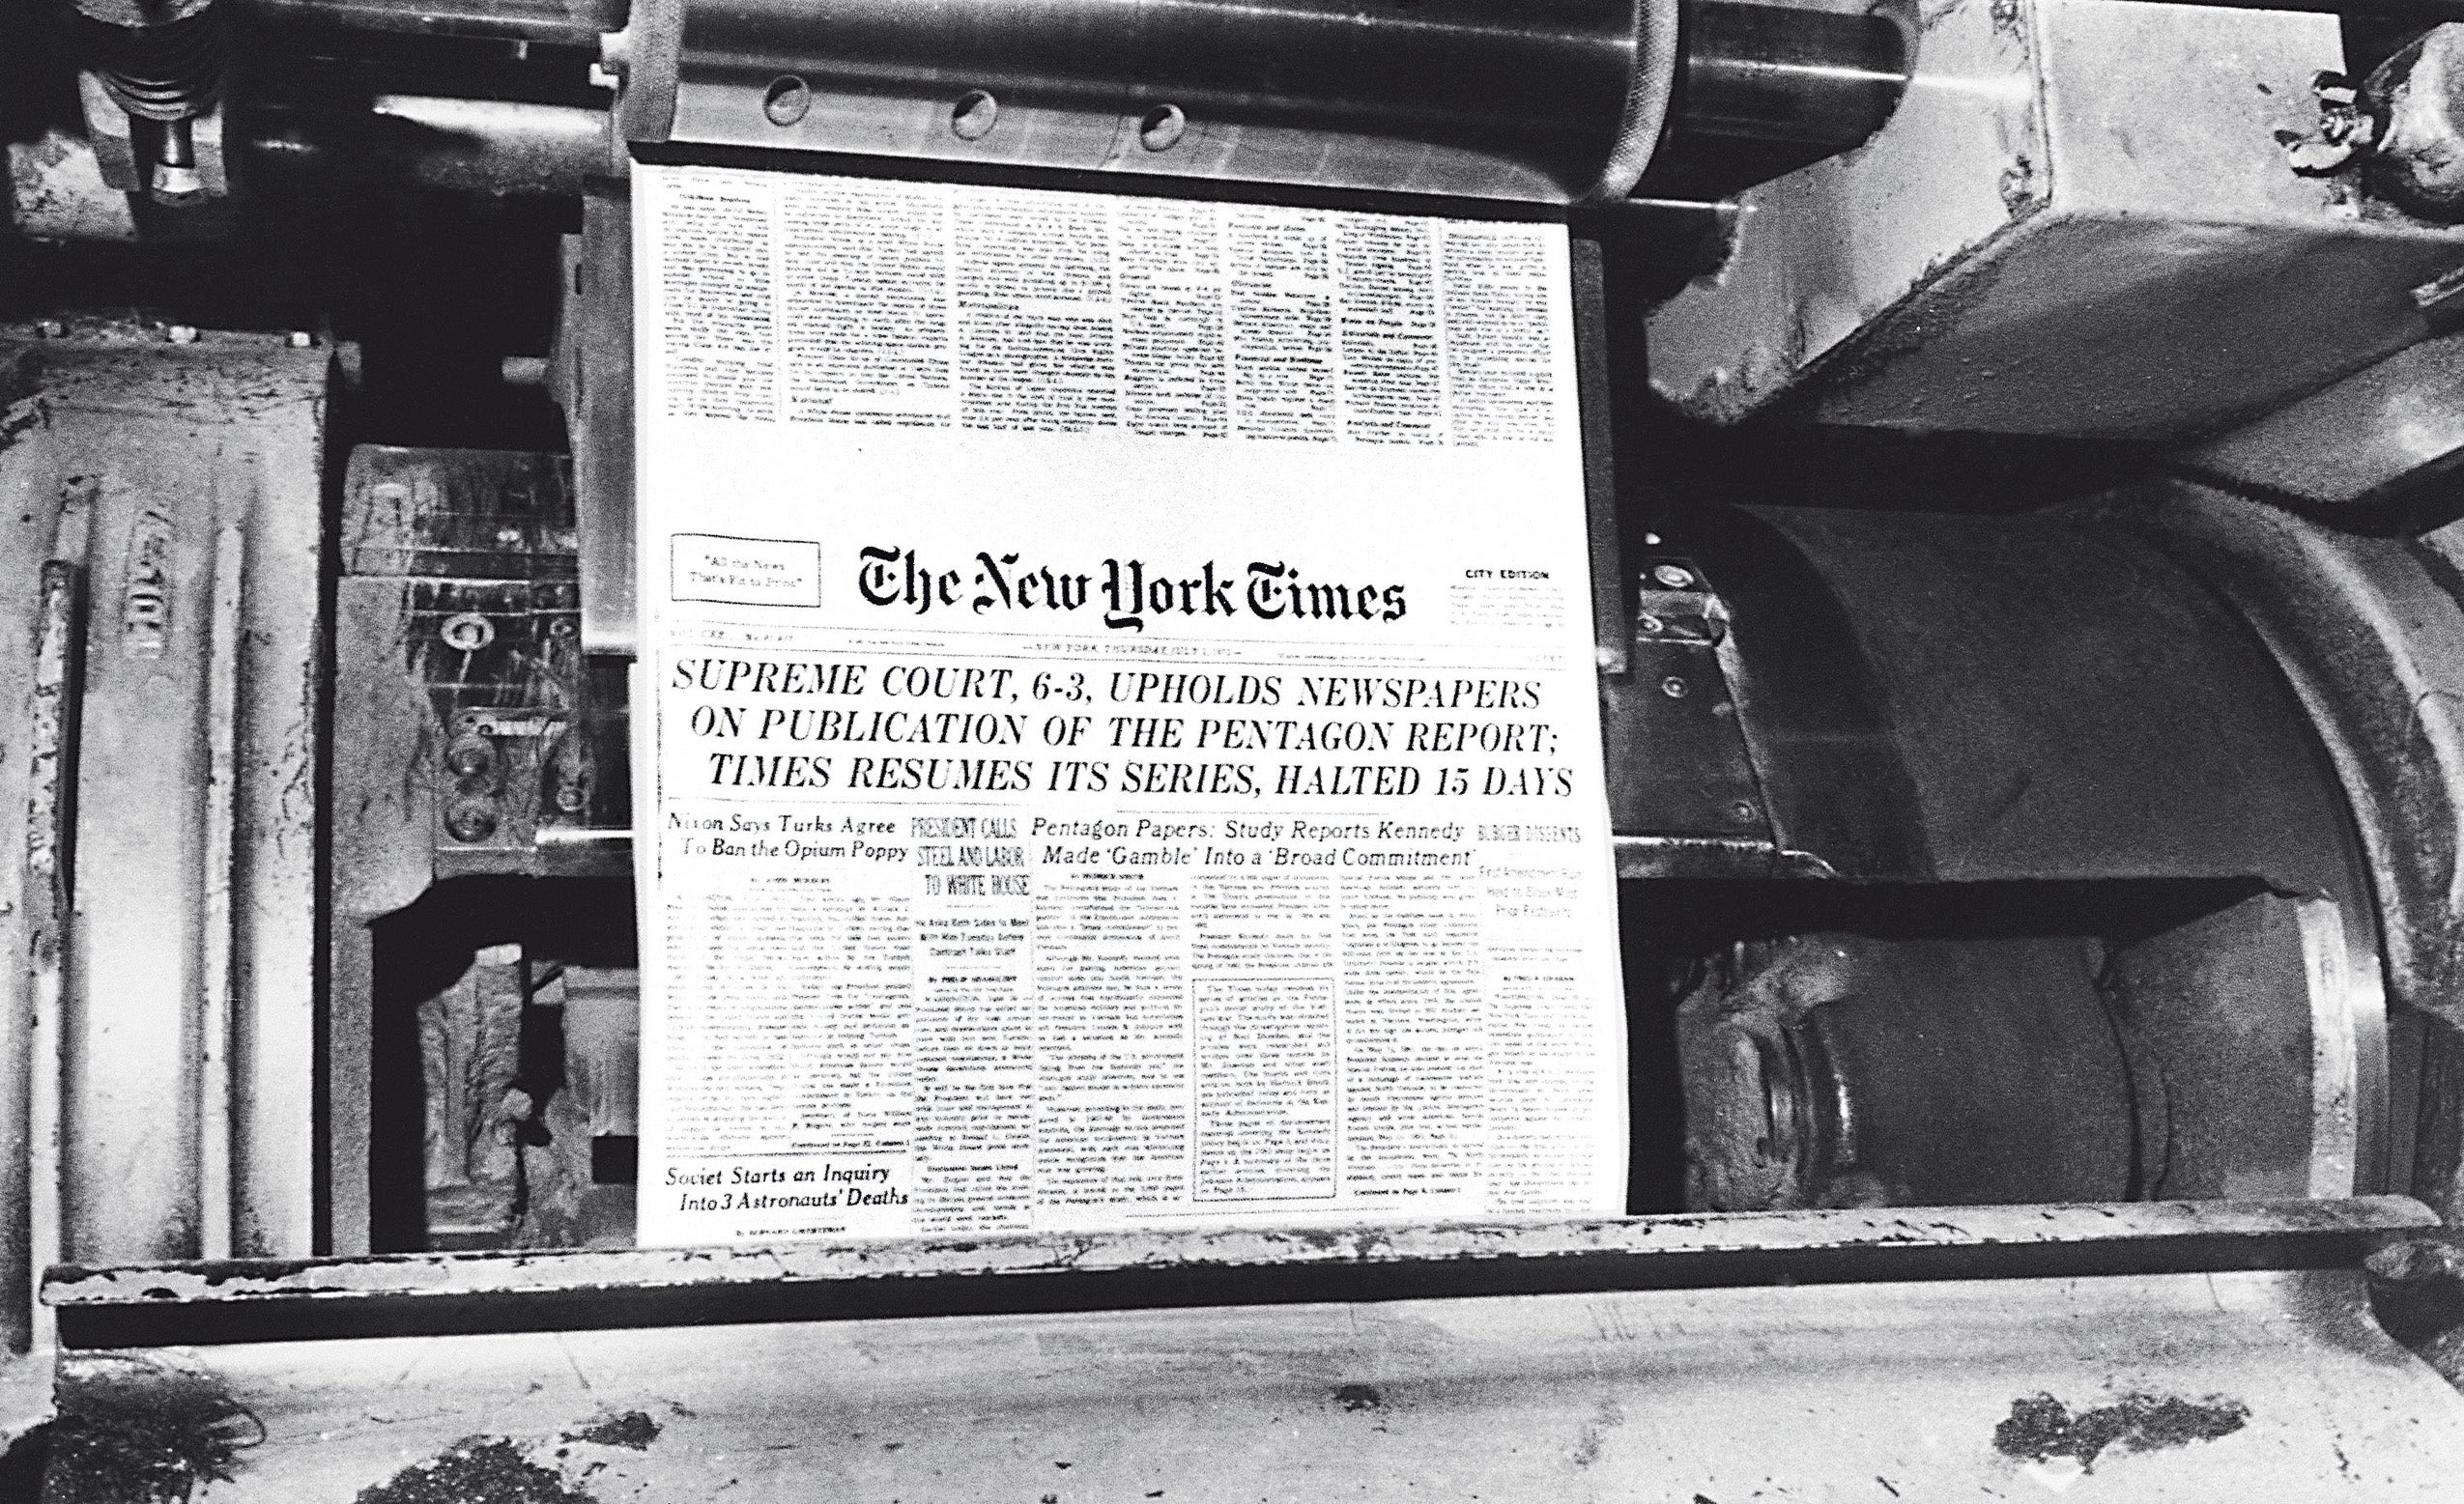 The front page of the New York Times on a printing press